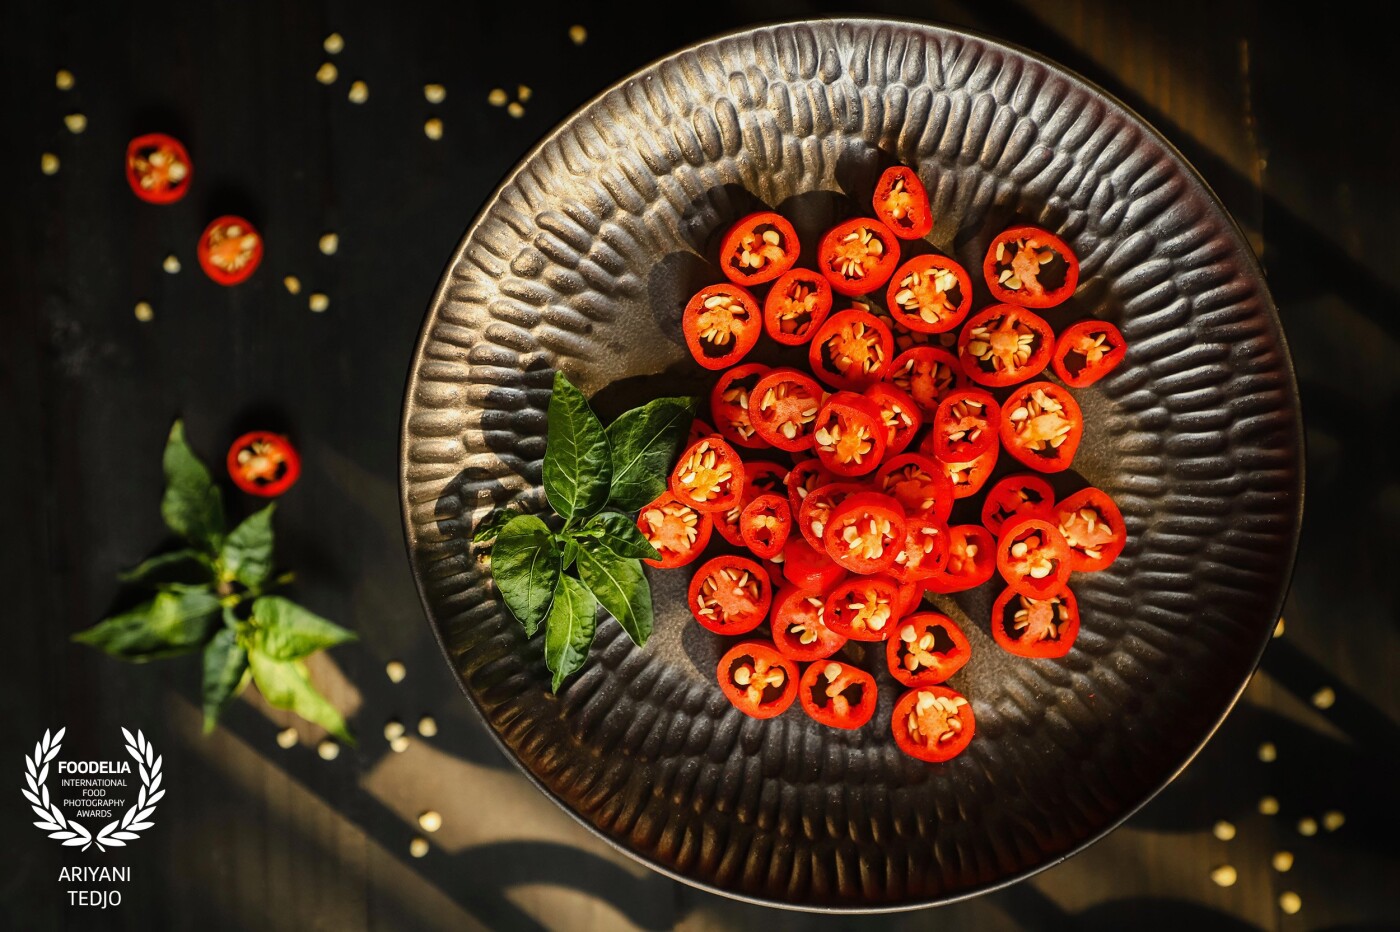 Dare to be hot and beautiful! Slices of fresh red chili peppers garnished with fresh chili pepper leaves from the garden. A gobo is used to give an ornamented shadow to the rustic wooden table underneath the raised plate.